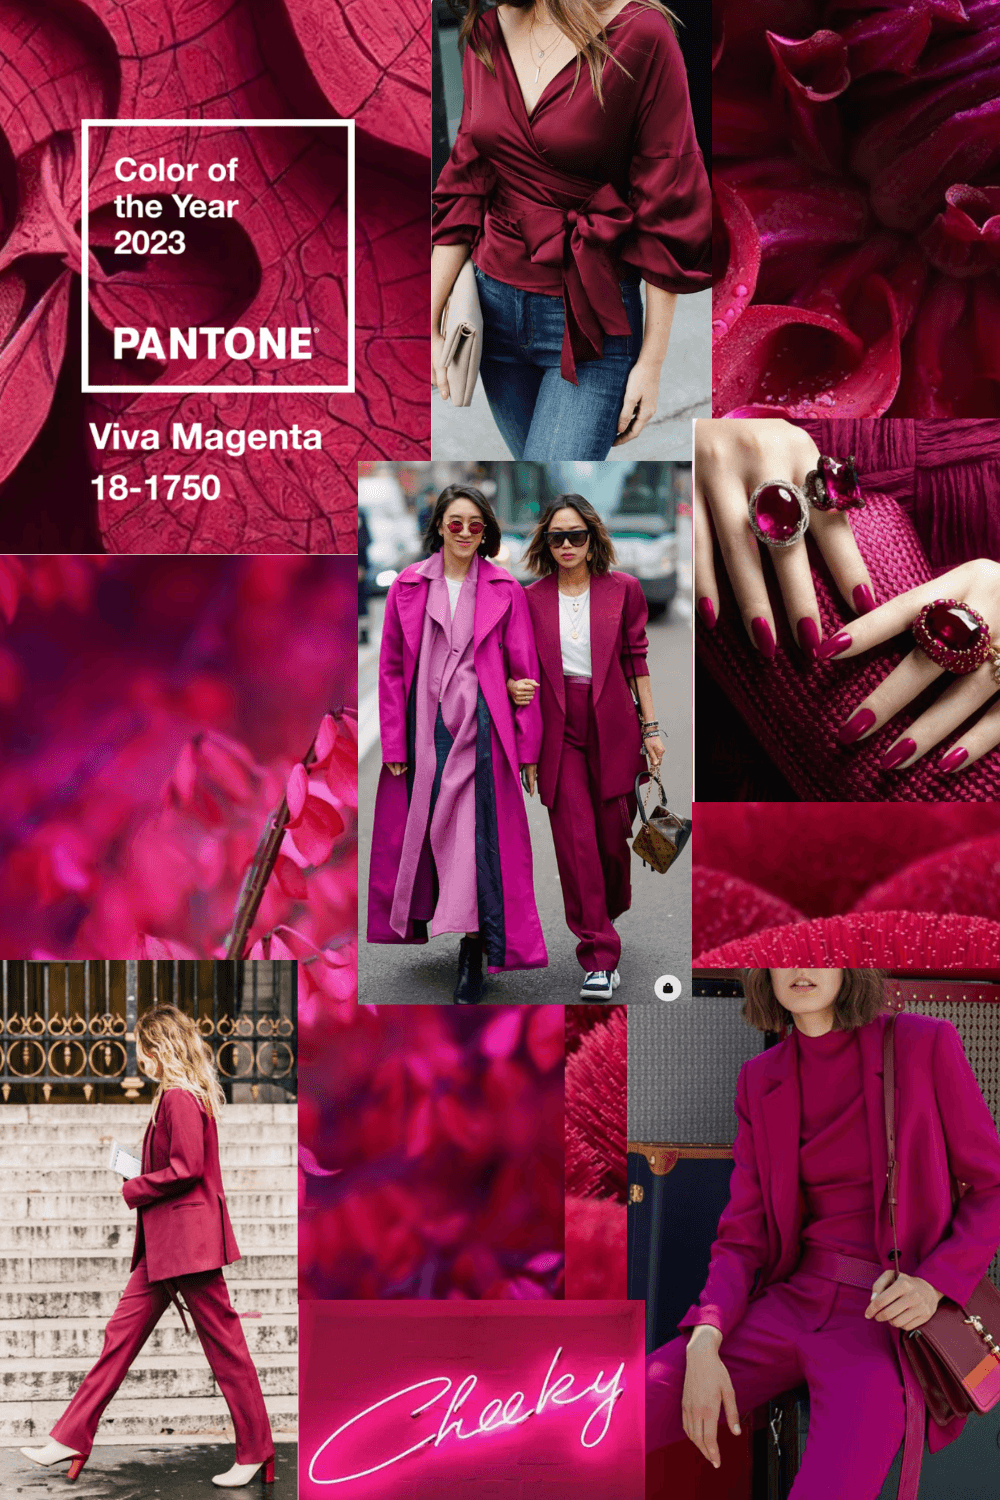 Viva Magenta Is Pantone's Color of the Year 2023